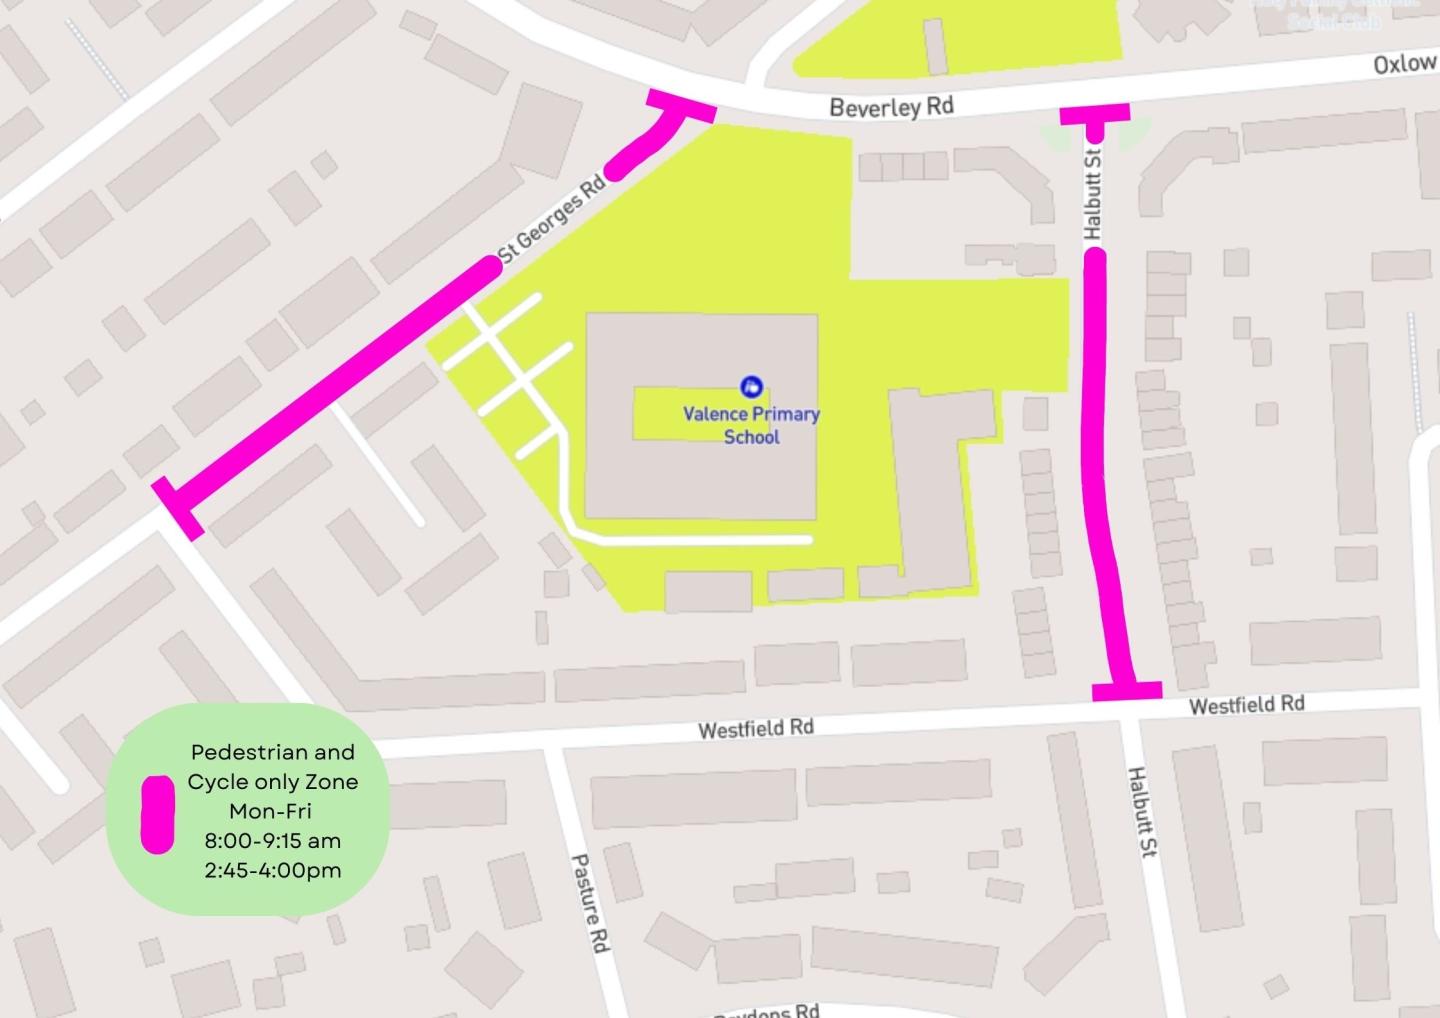 A map showing the location of the School Street for Valence Primary School